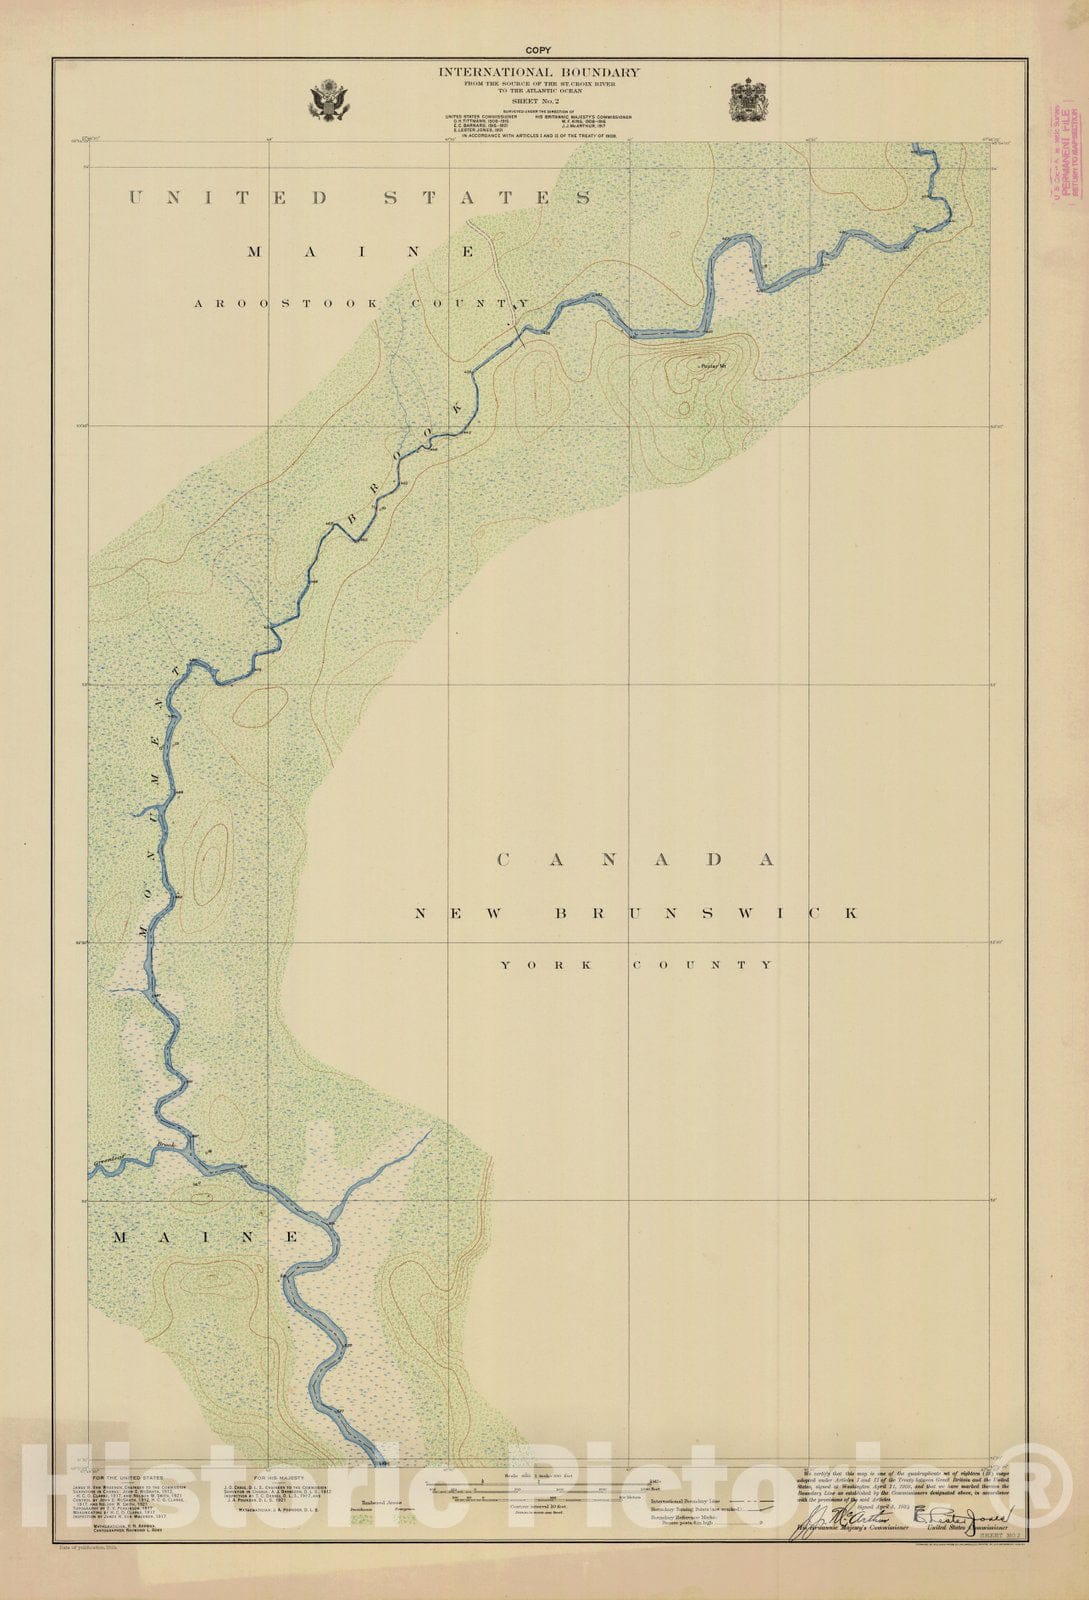 Historic Nautical Map - International Boundary, From The Source Of The St. Croix River To The Atlantic Ocean, Sheet No. 2, ME, 1924 NOAA Topographic - Vintage Wall Art